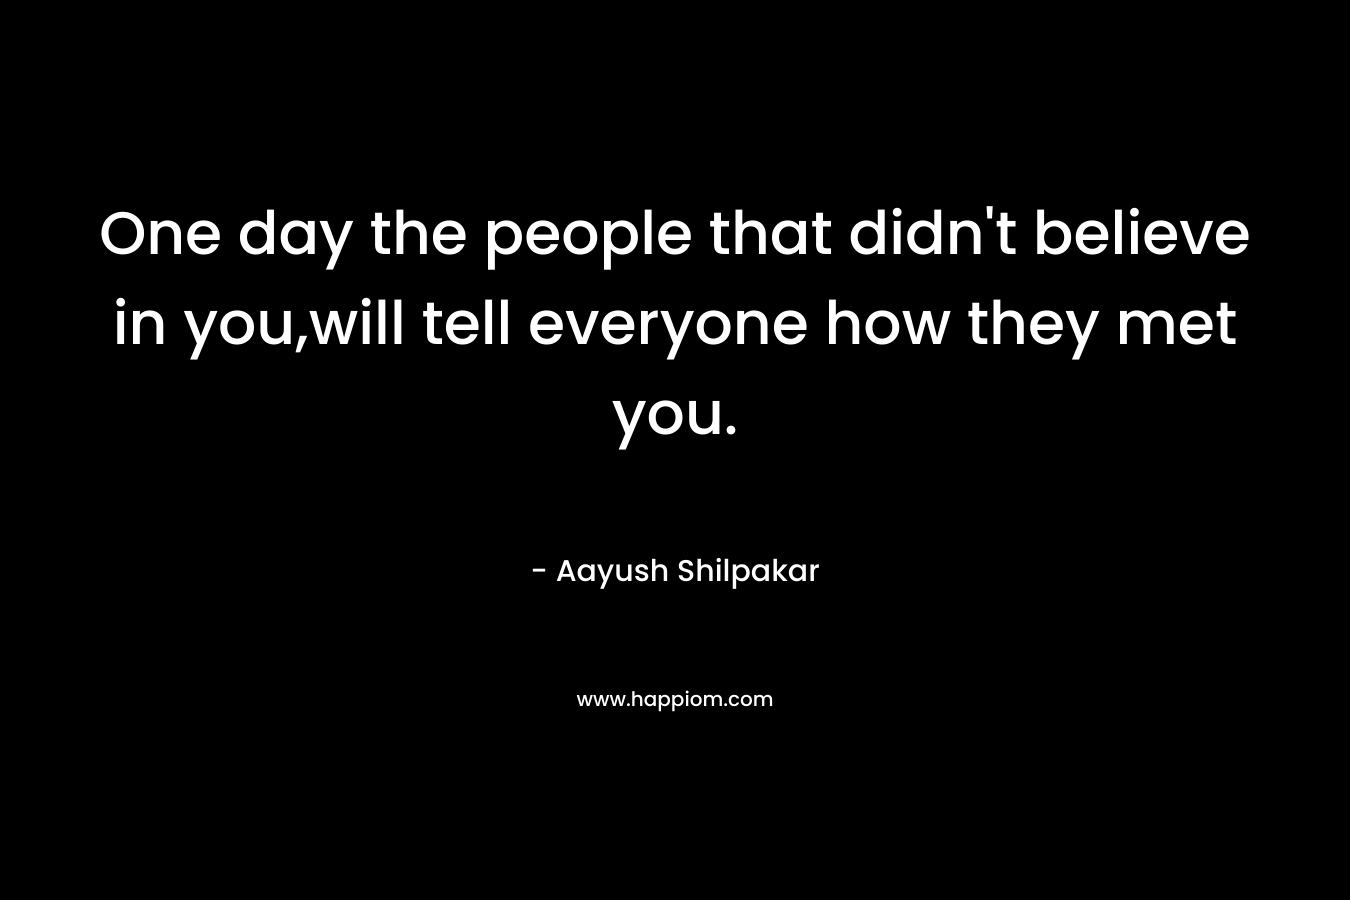 One day the people that didn’t believe in you,will tell everyone how they met you. – Aayush Shilpakar